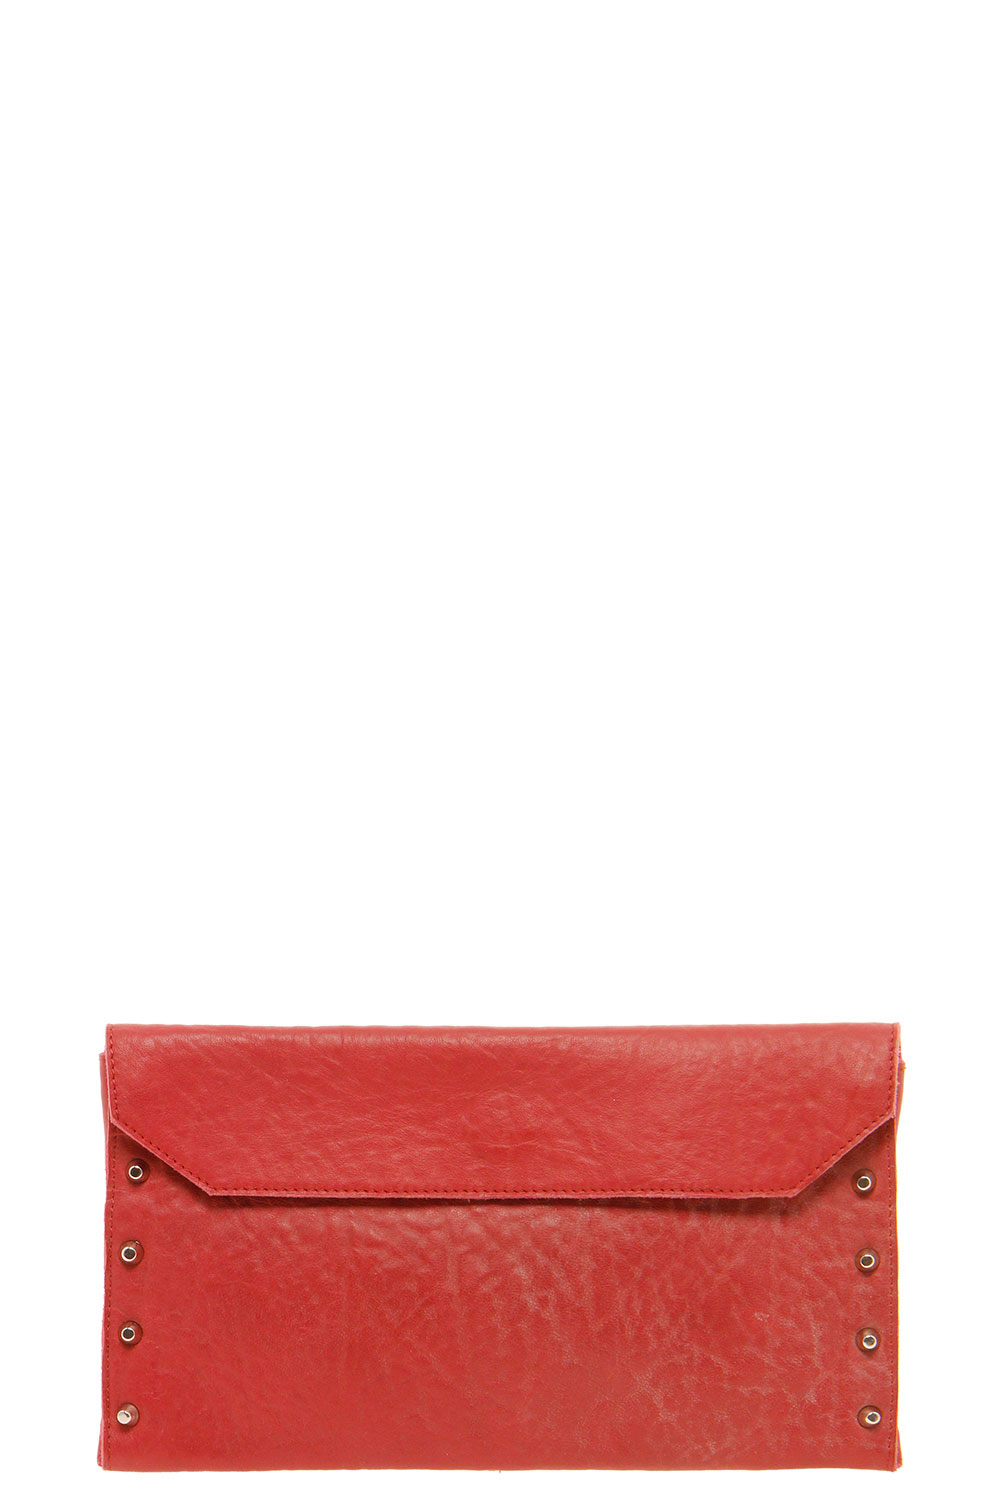 boohoo Tilly Leather Stud Clutch Bag - red